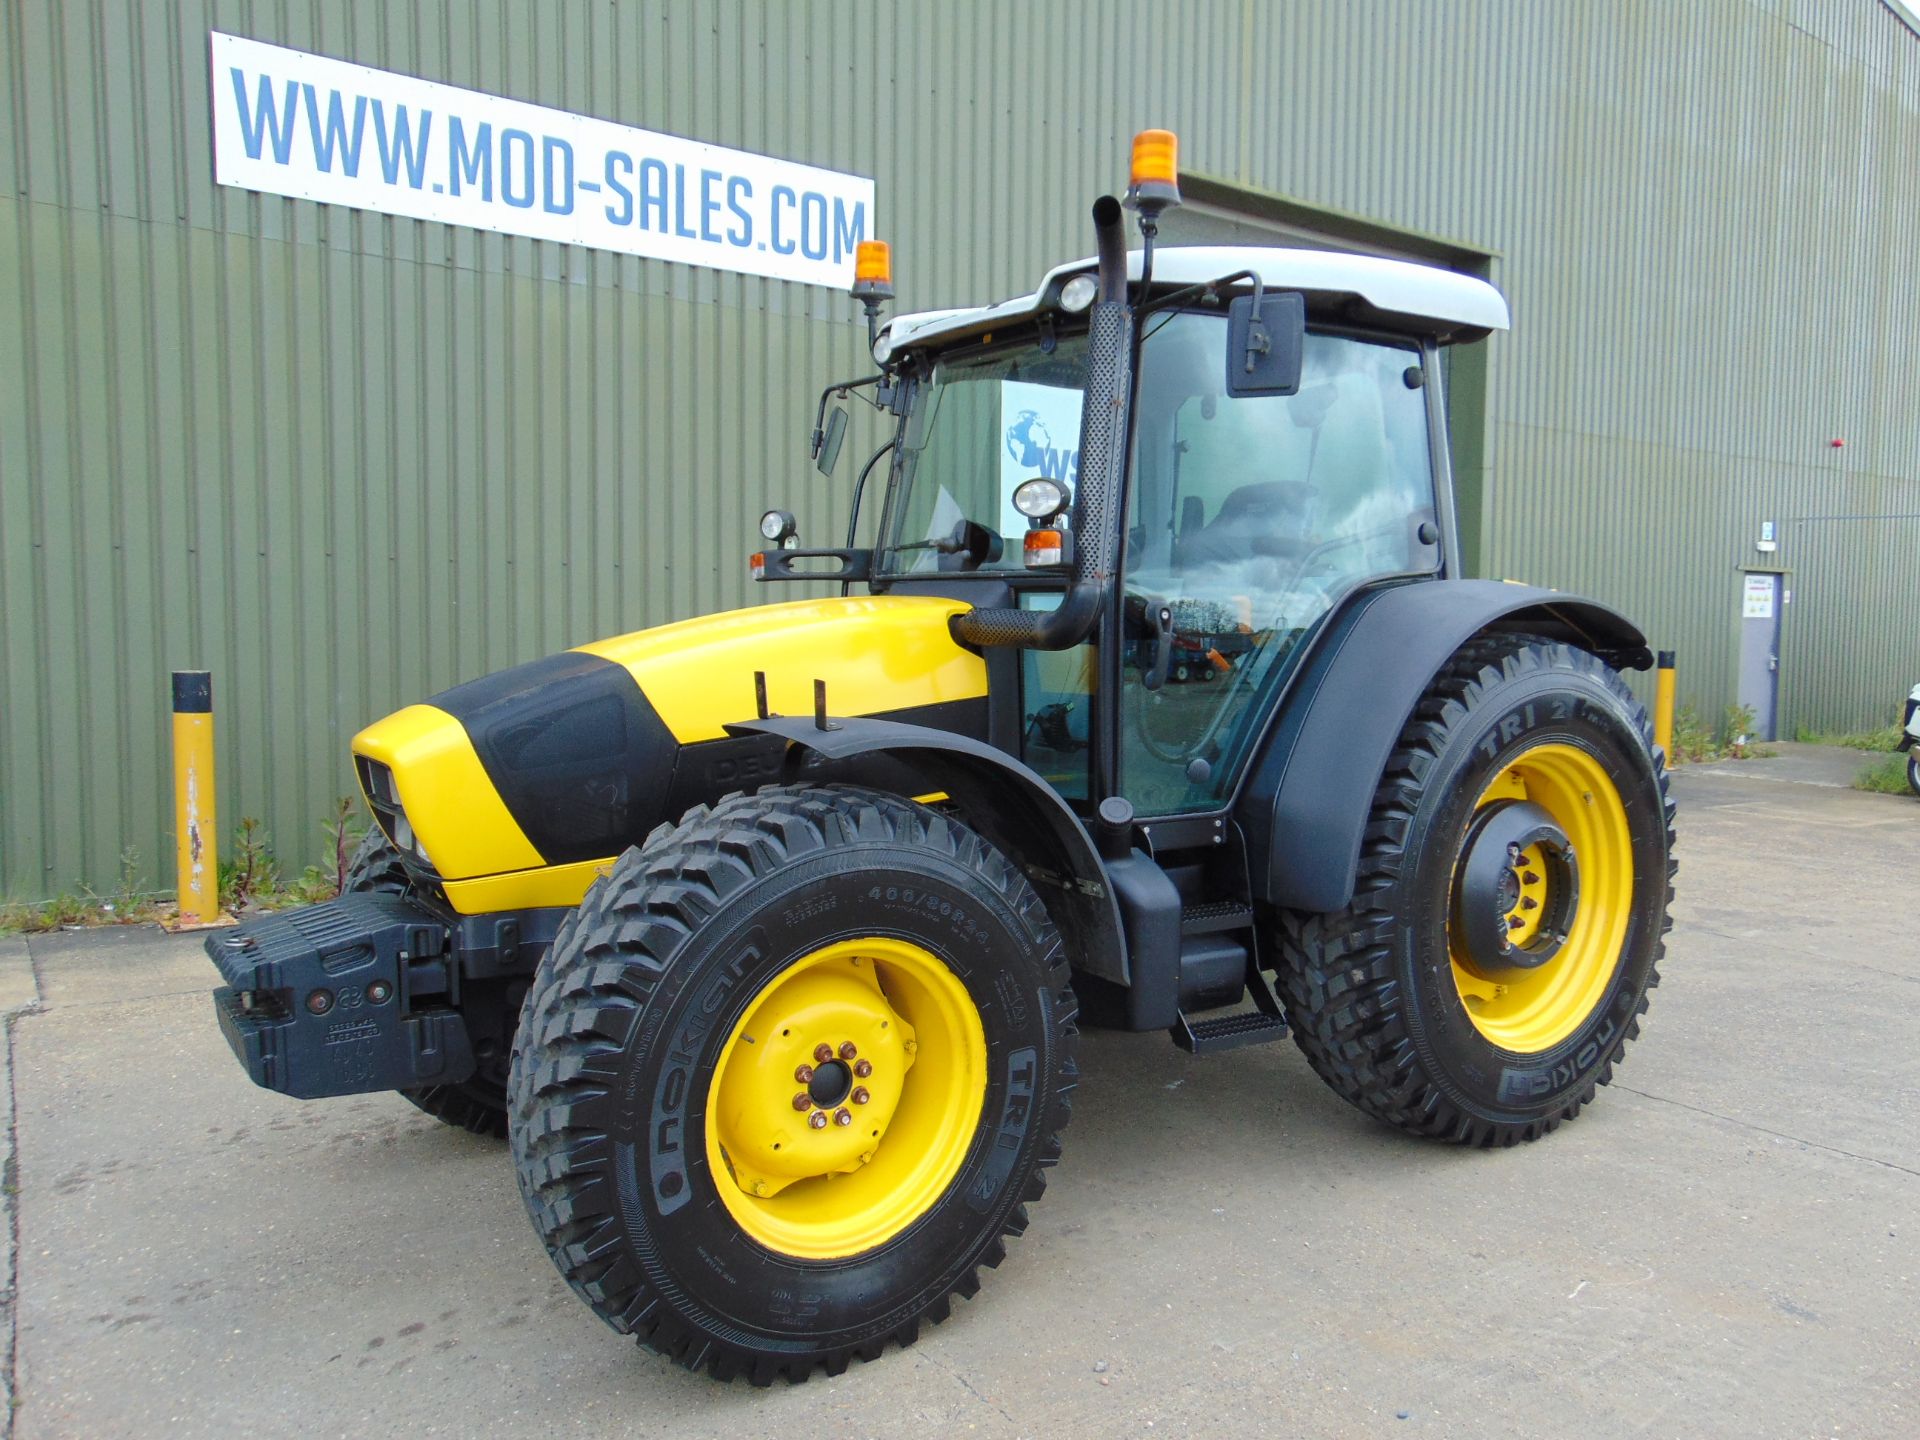 2010 Deutz-Fahr Agrofarm 420 - 4WD 97HP Agricultural Tractor 967 hrs only From MOD - Image 4 of 56